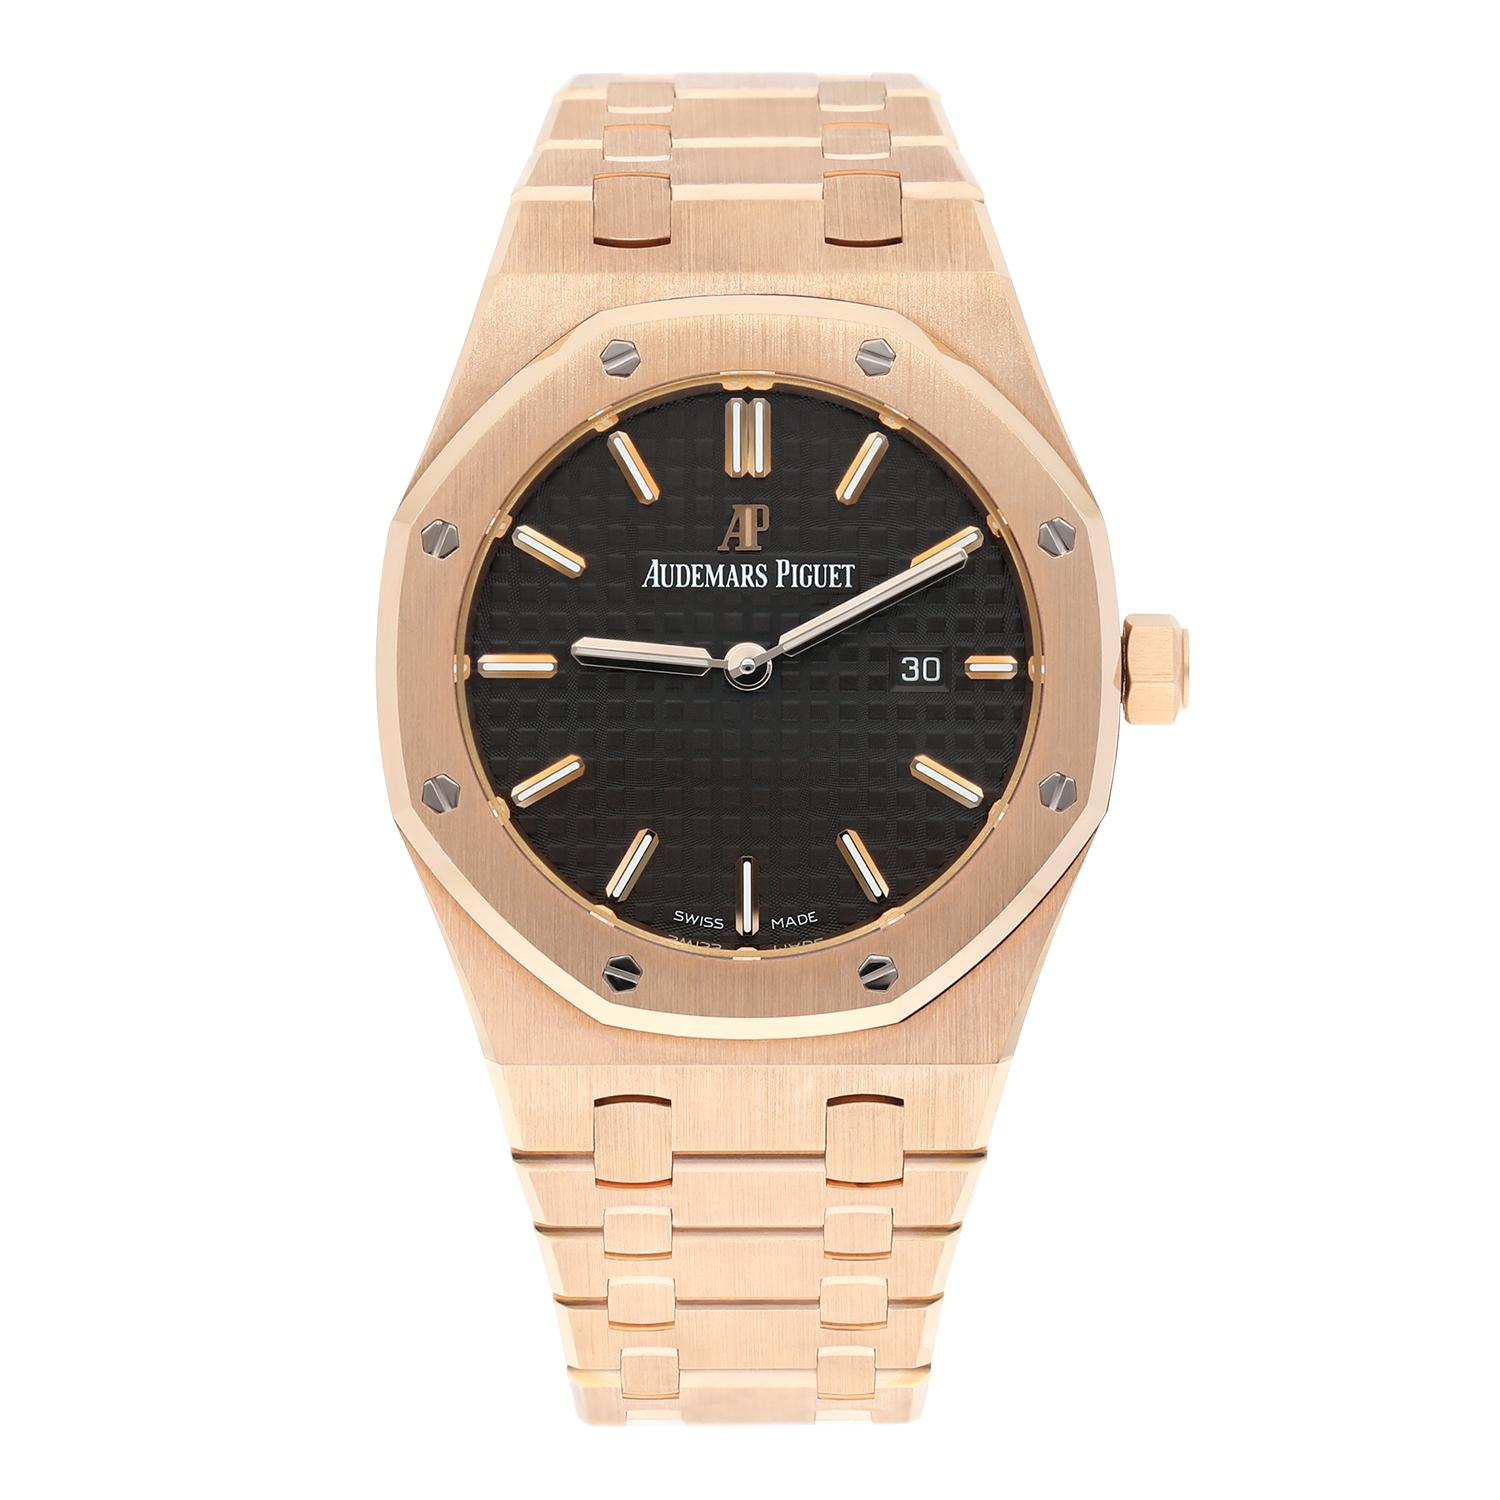 Unworn Audemars Piguet Royal Oak Lady 33mm Rose Gold Brown Dial 67650OR.OO.1261OR.01
Complete with original box and original papers.

This Royal Oak Quartz is designed in a feminine 33mm 18-carat rose gold case and octagonal bezel. It features the